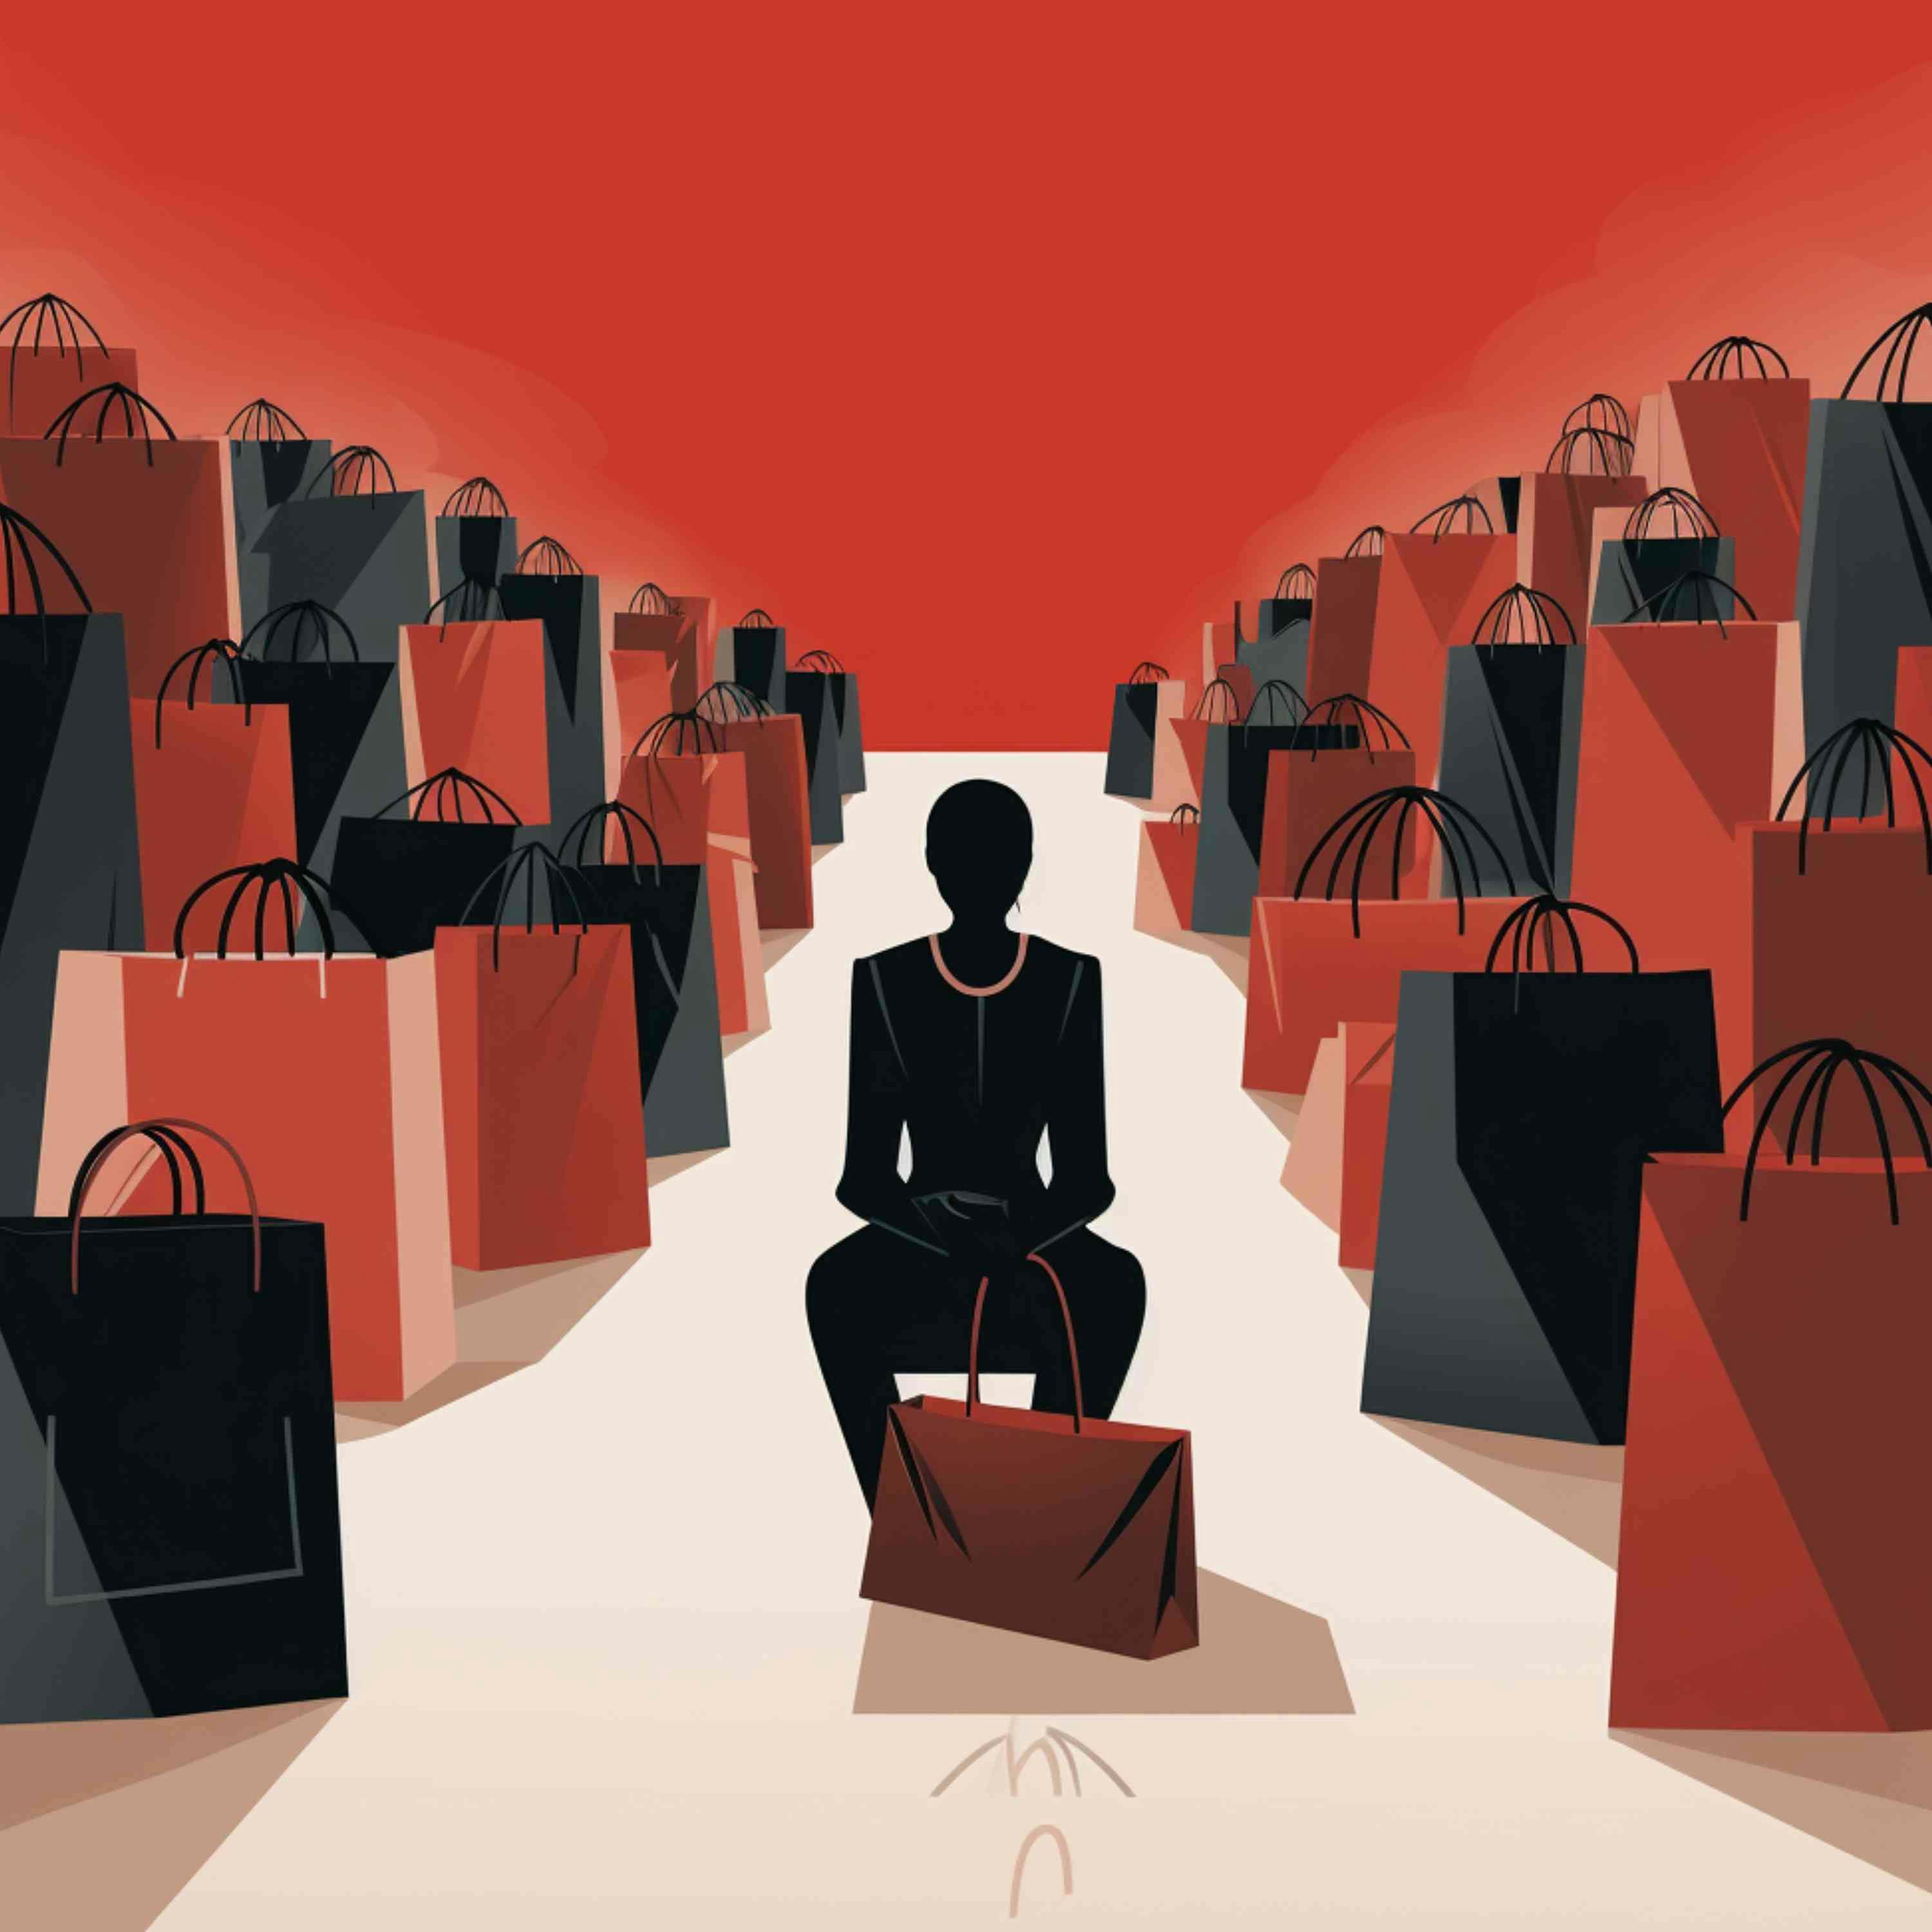 2555: 4 Reasons Why You Can’t Stop Shopping and What to Do About It by Jennifer of Simply Fiercely on Shopping Addiction